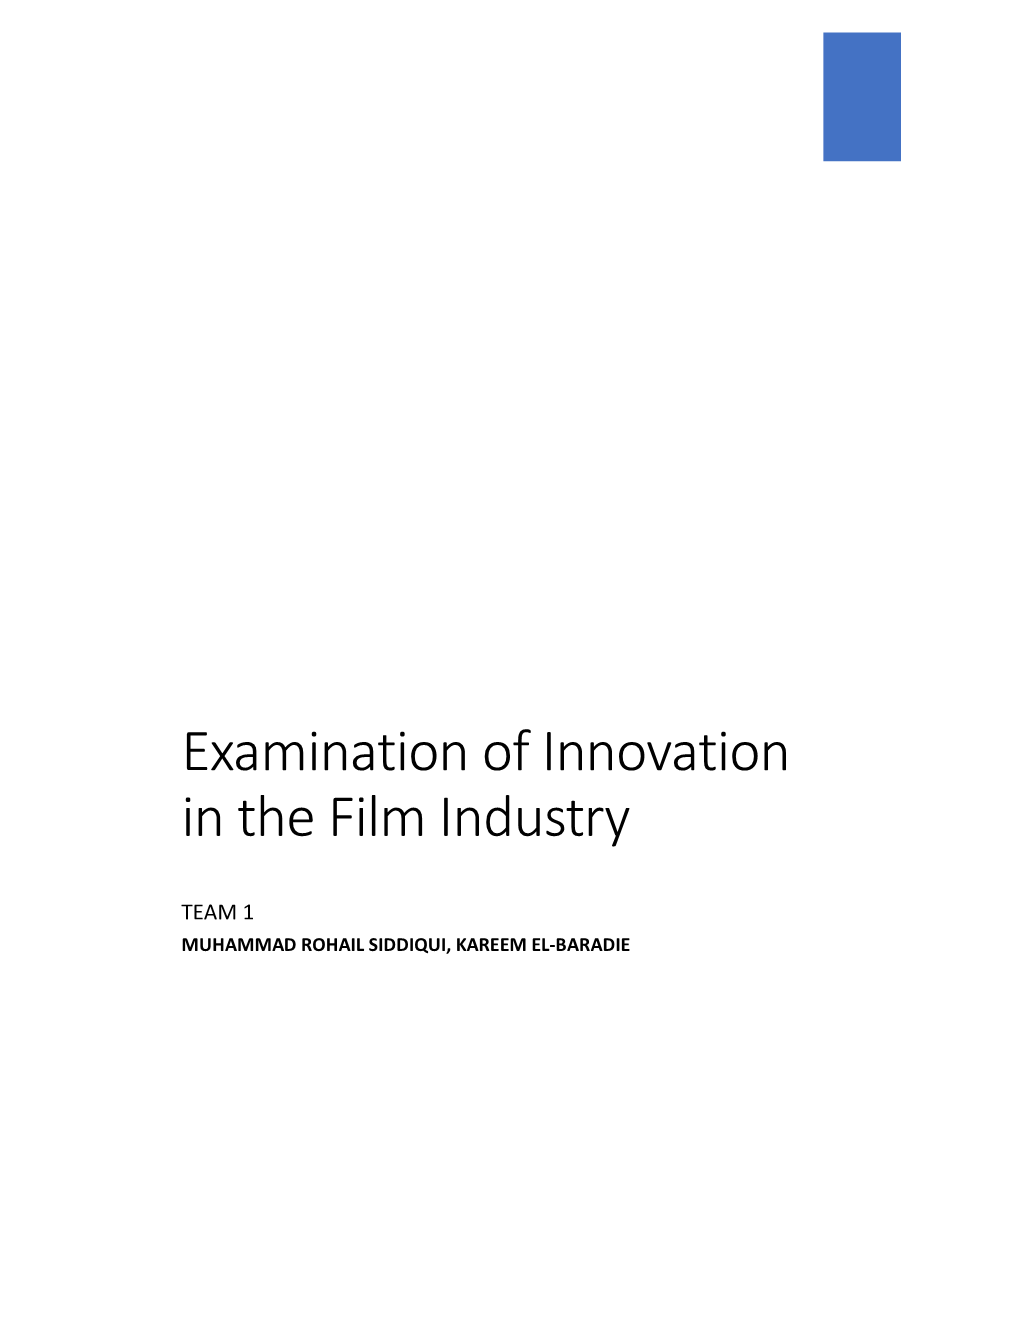 Examination of Innovation in the Film Industry